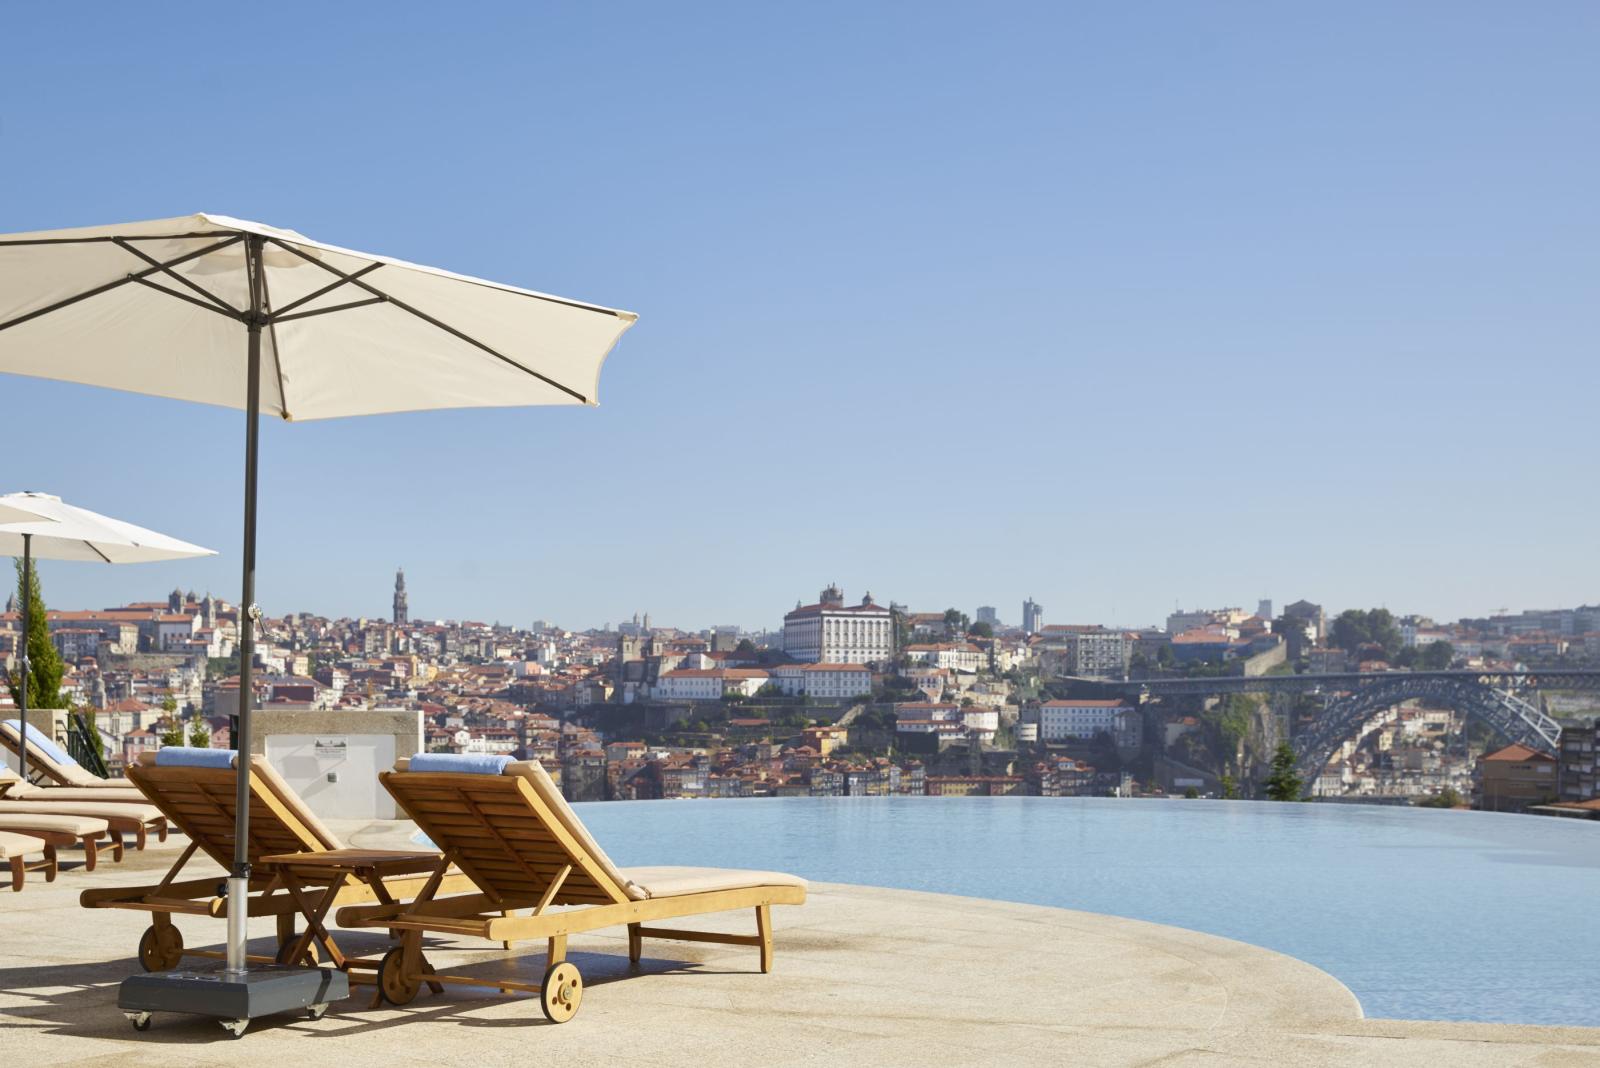 Swimming pool of the Yeatman, Portugal